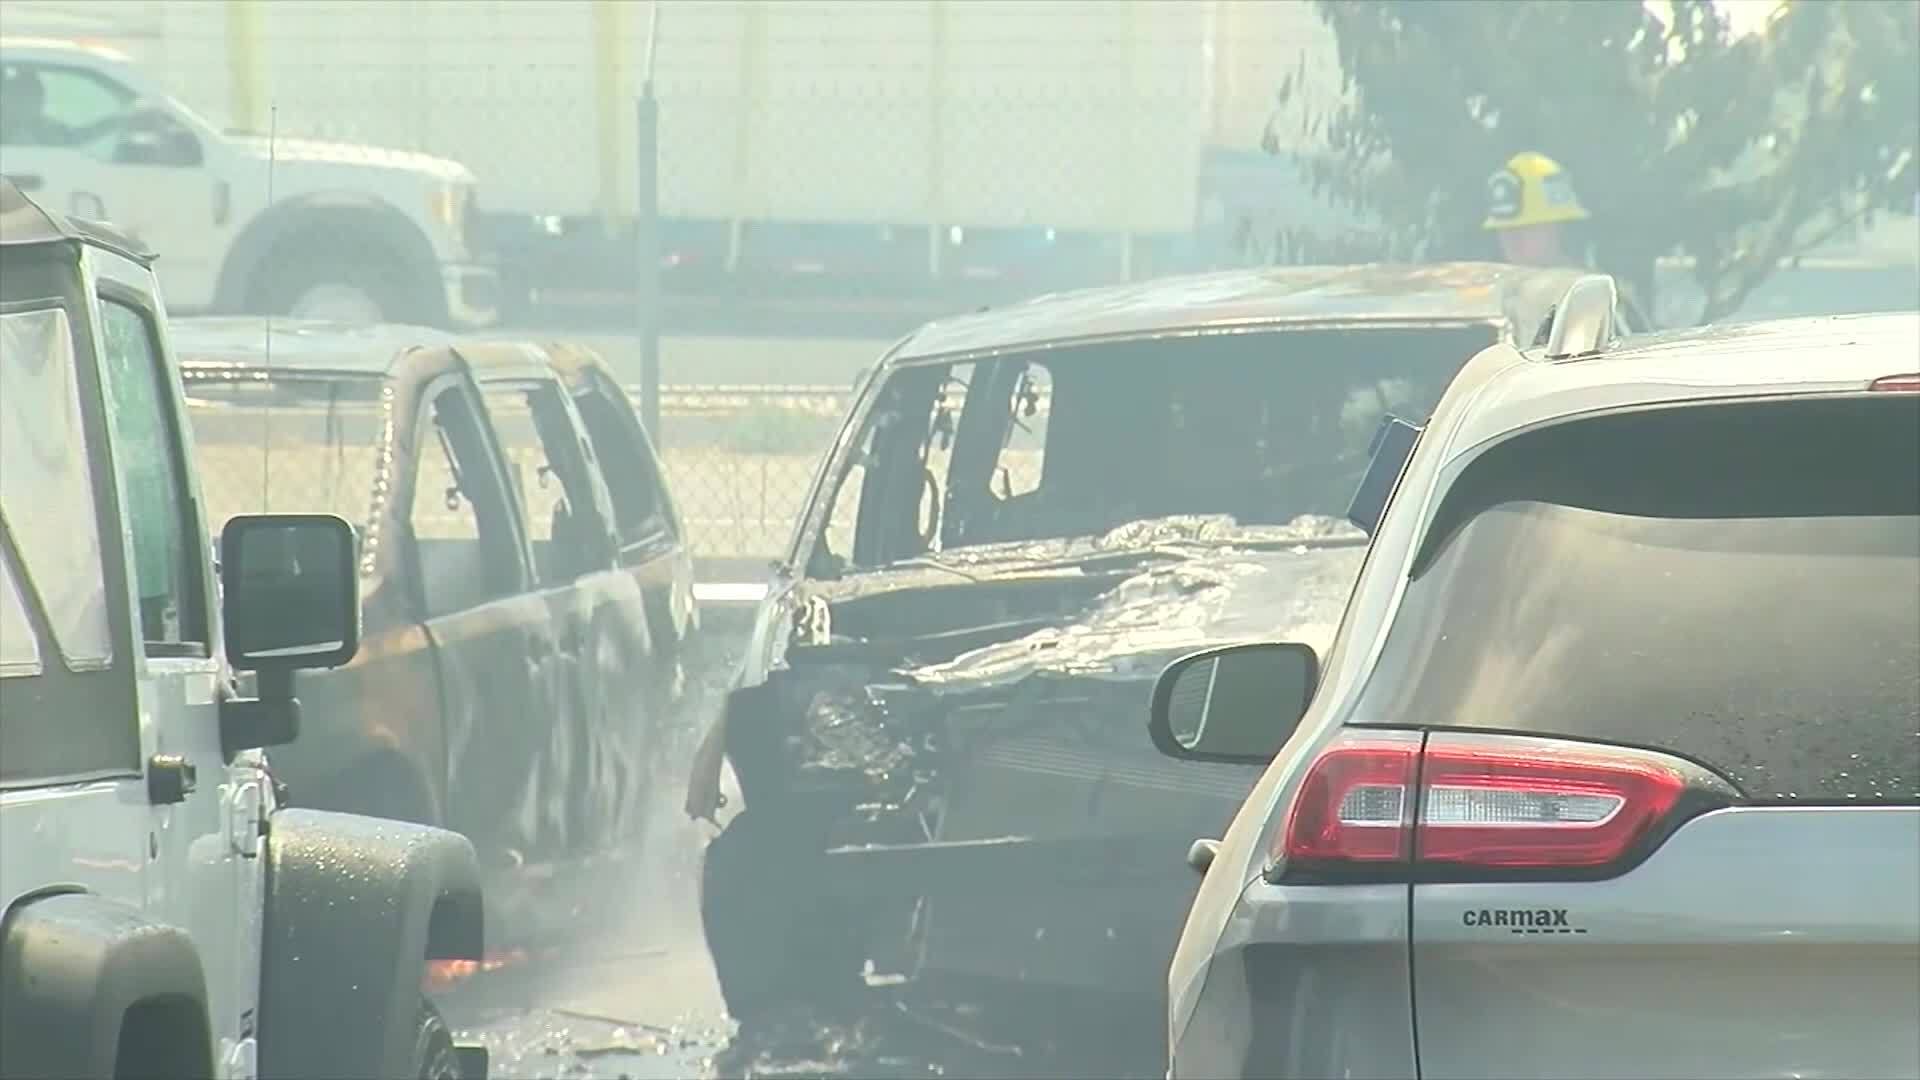 Fire In Bakersfield Burns Cars At Carmax